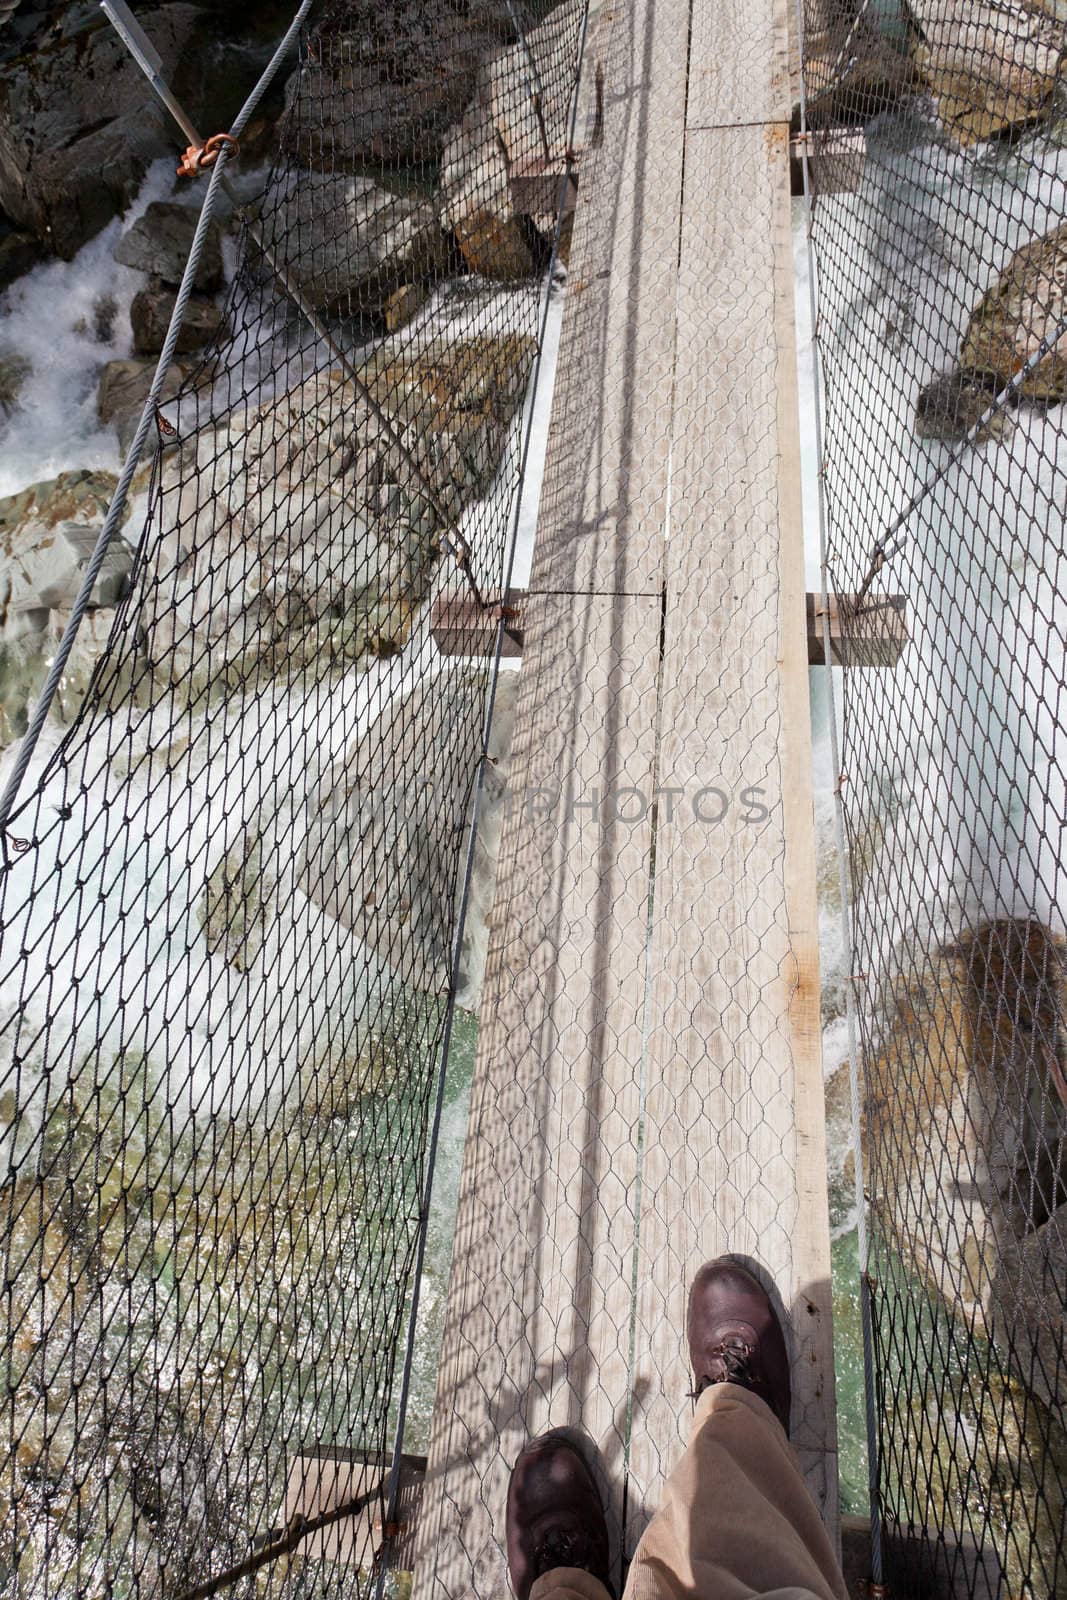 Boots on narrow swing bridge over white water by PiLens